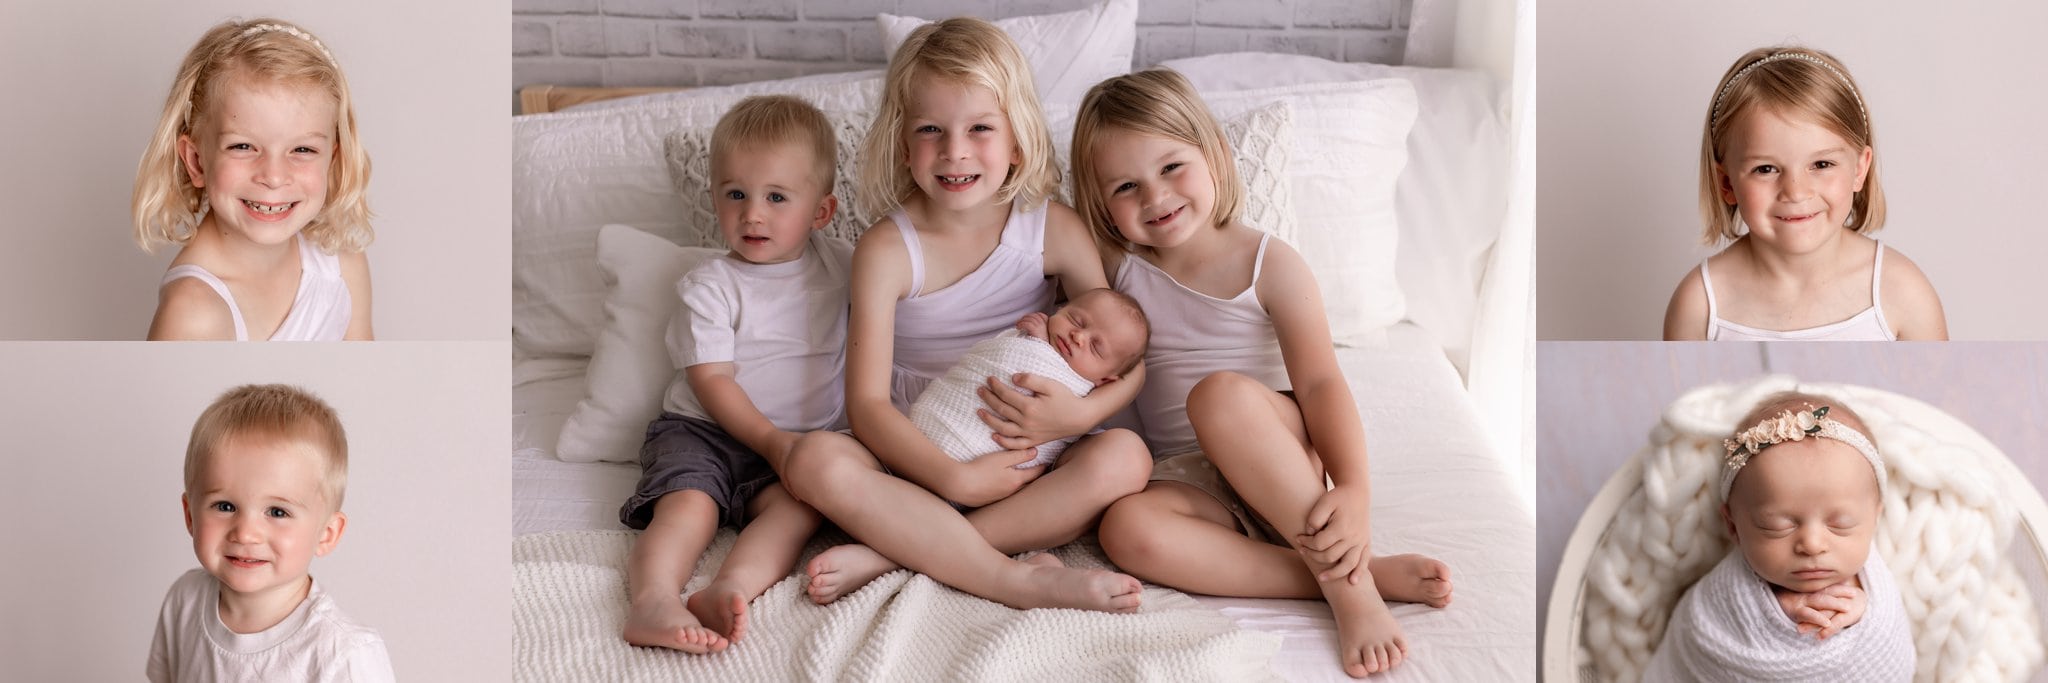 Siblings with newborn baby pose ideas